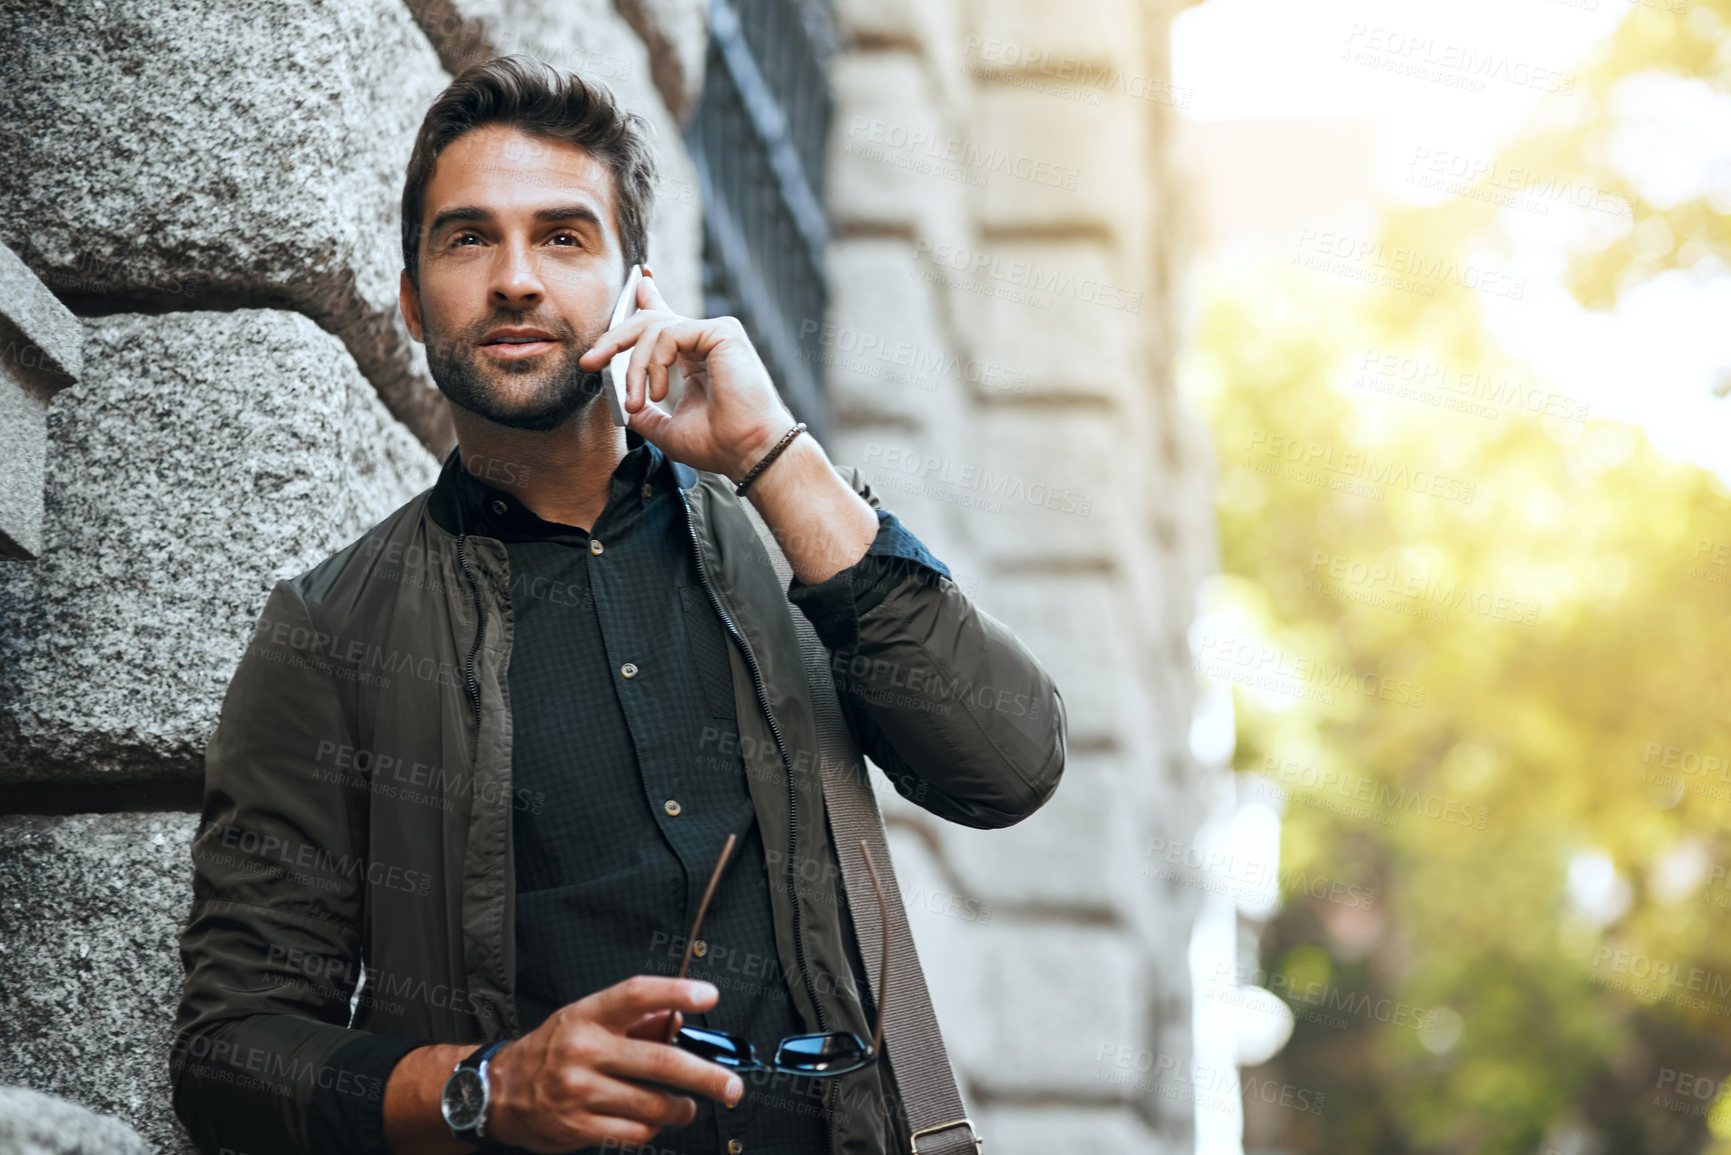 Buy stock photo Cropped shot of a handsome young man making a phonecall while traveling through the city